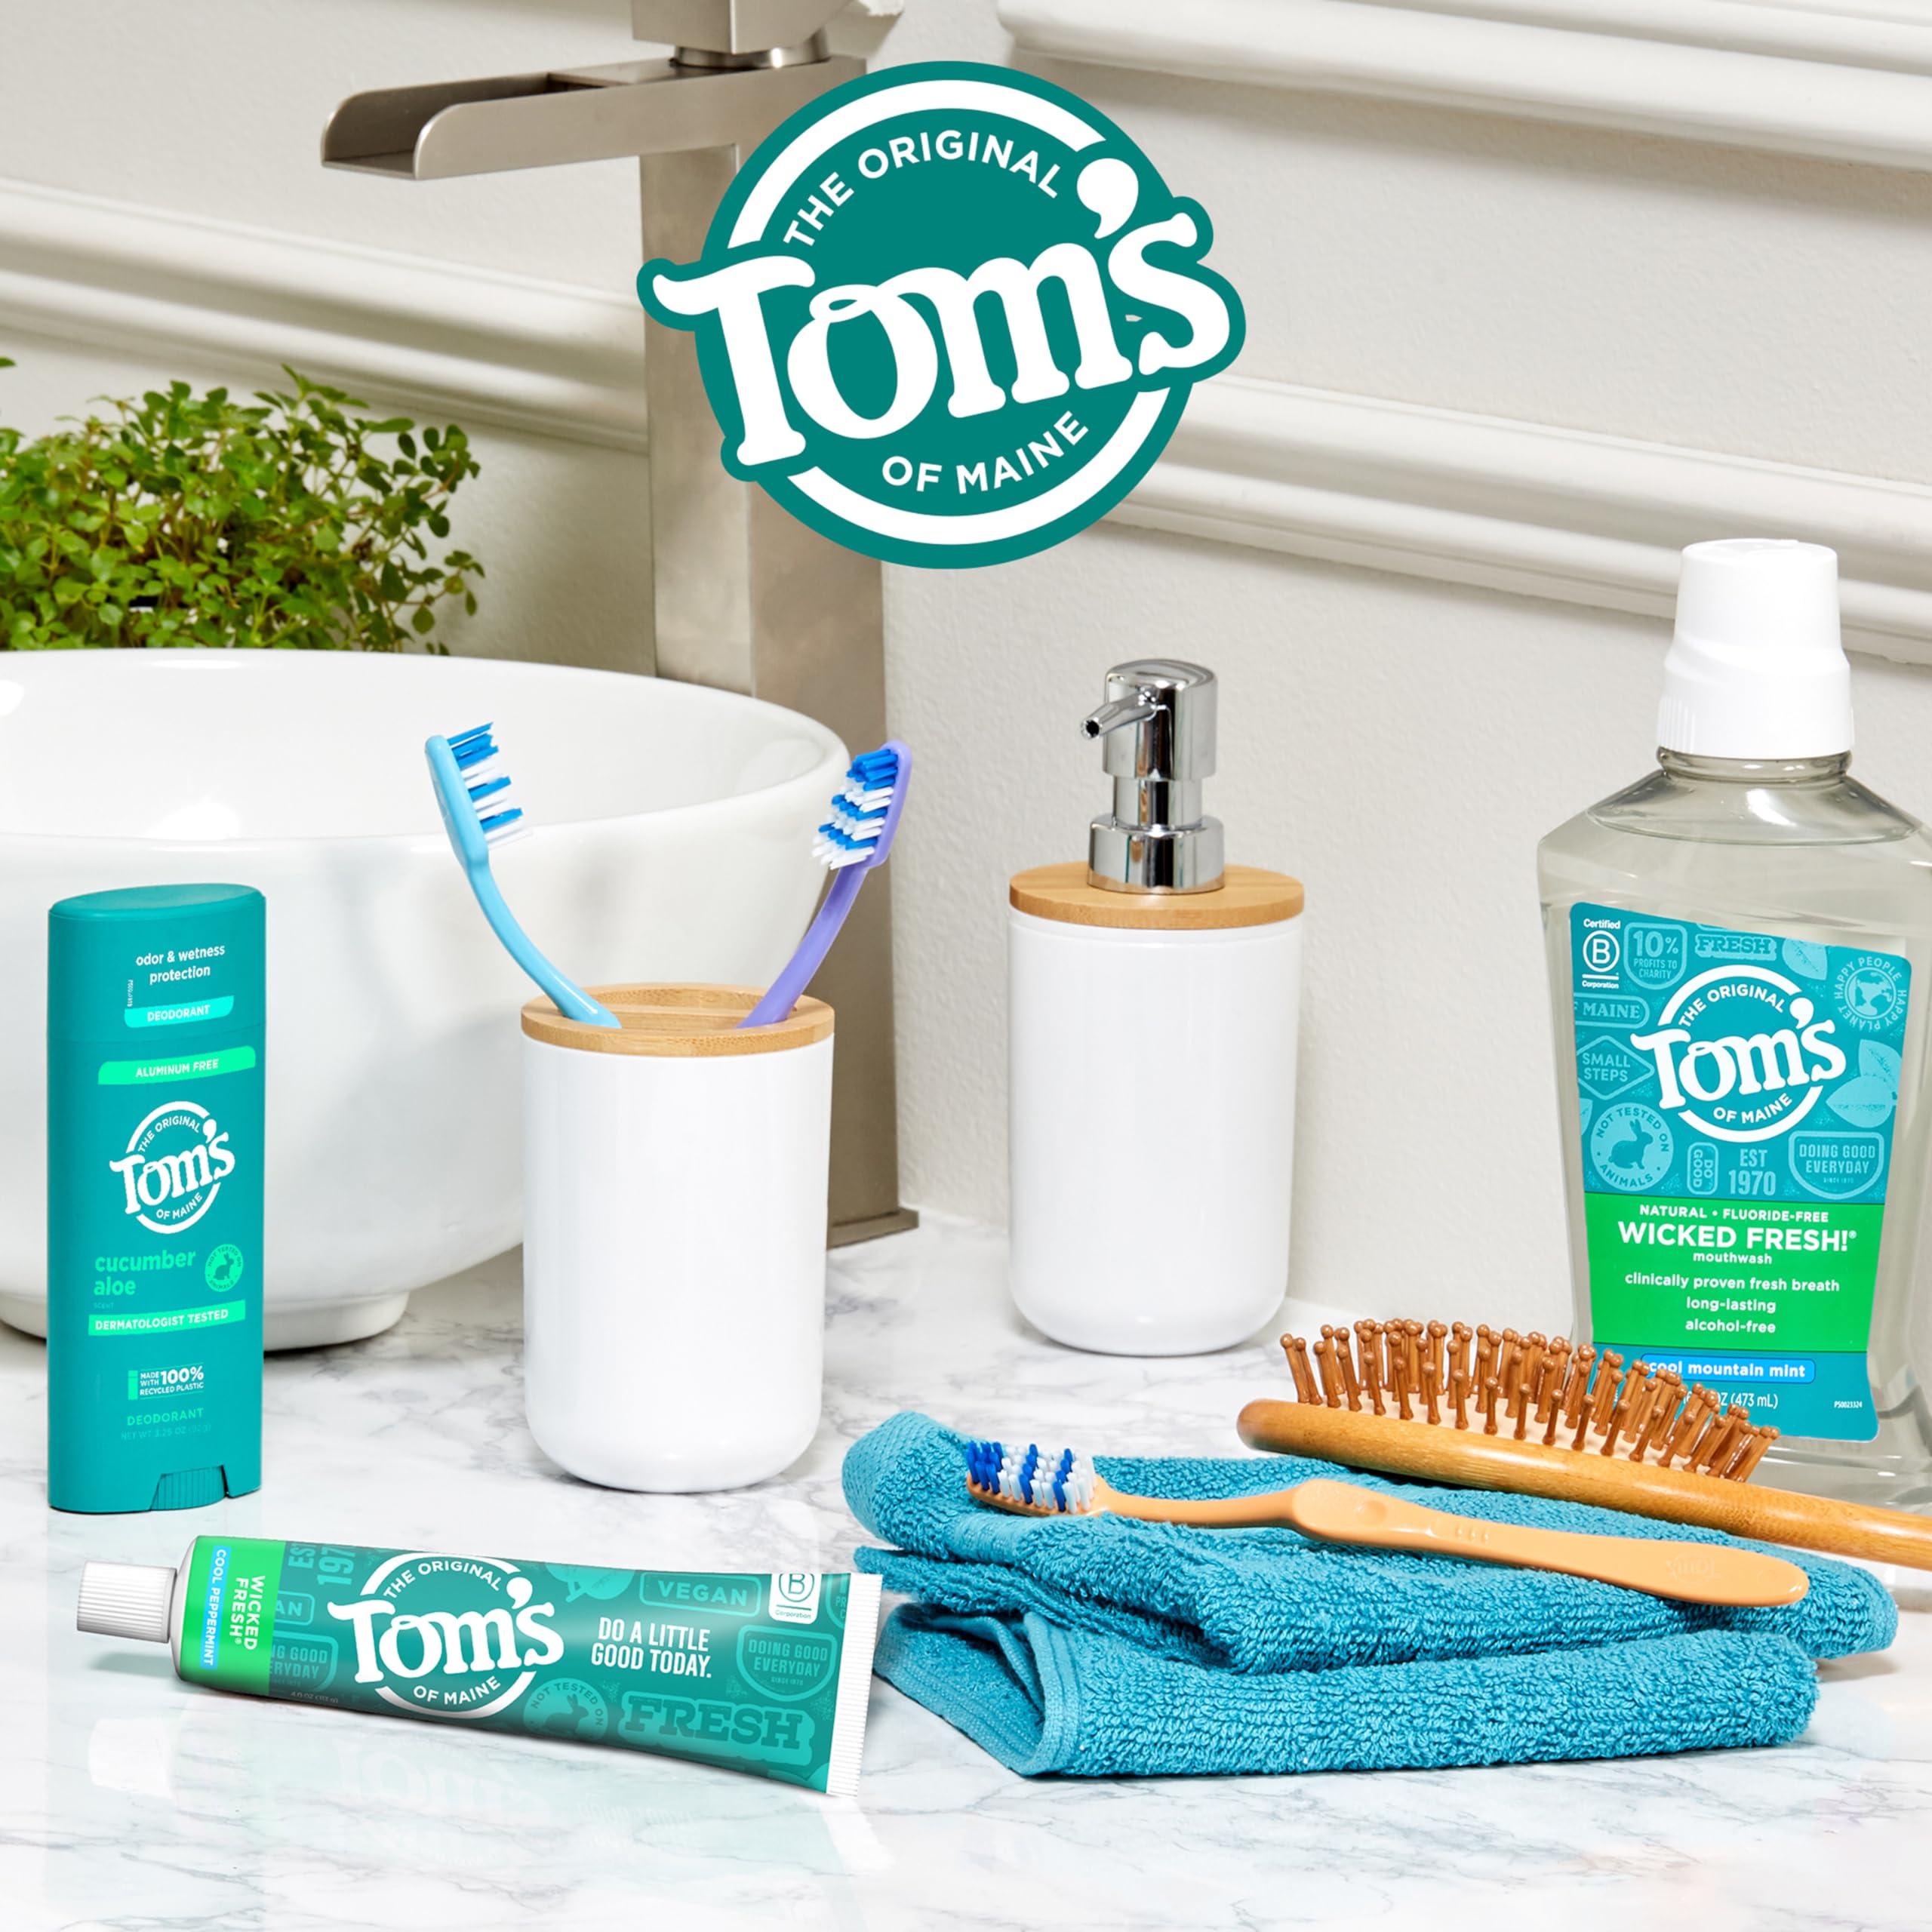 Tom's of Maine Wicked Fresh! Natural Fluoride Anticavity Toothpaste, 3 Pack, 4.0oz